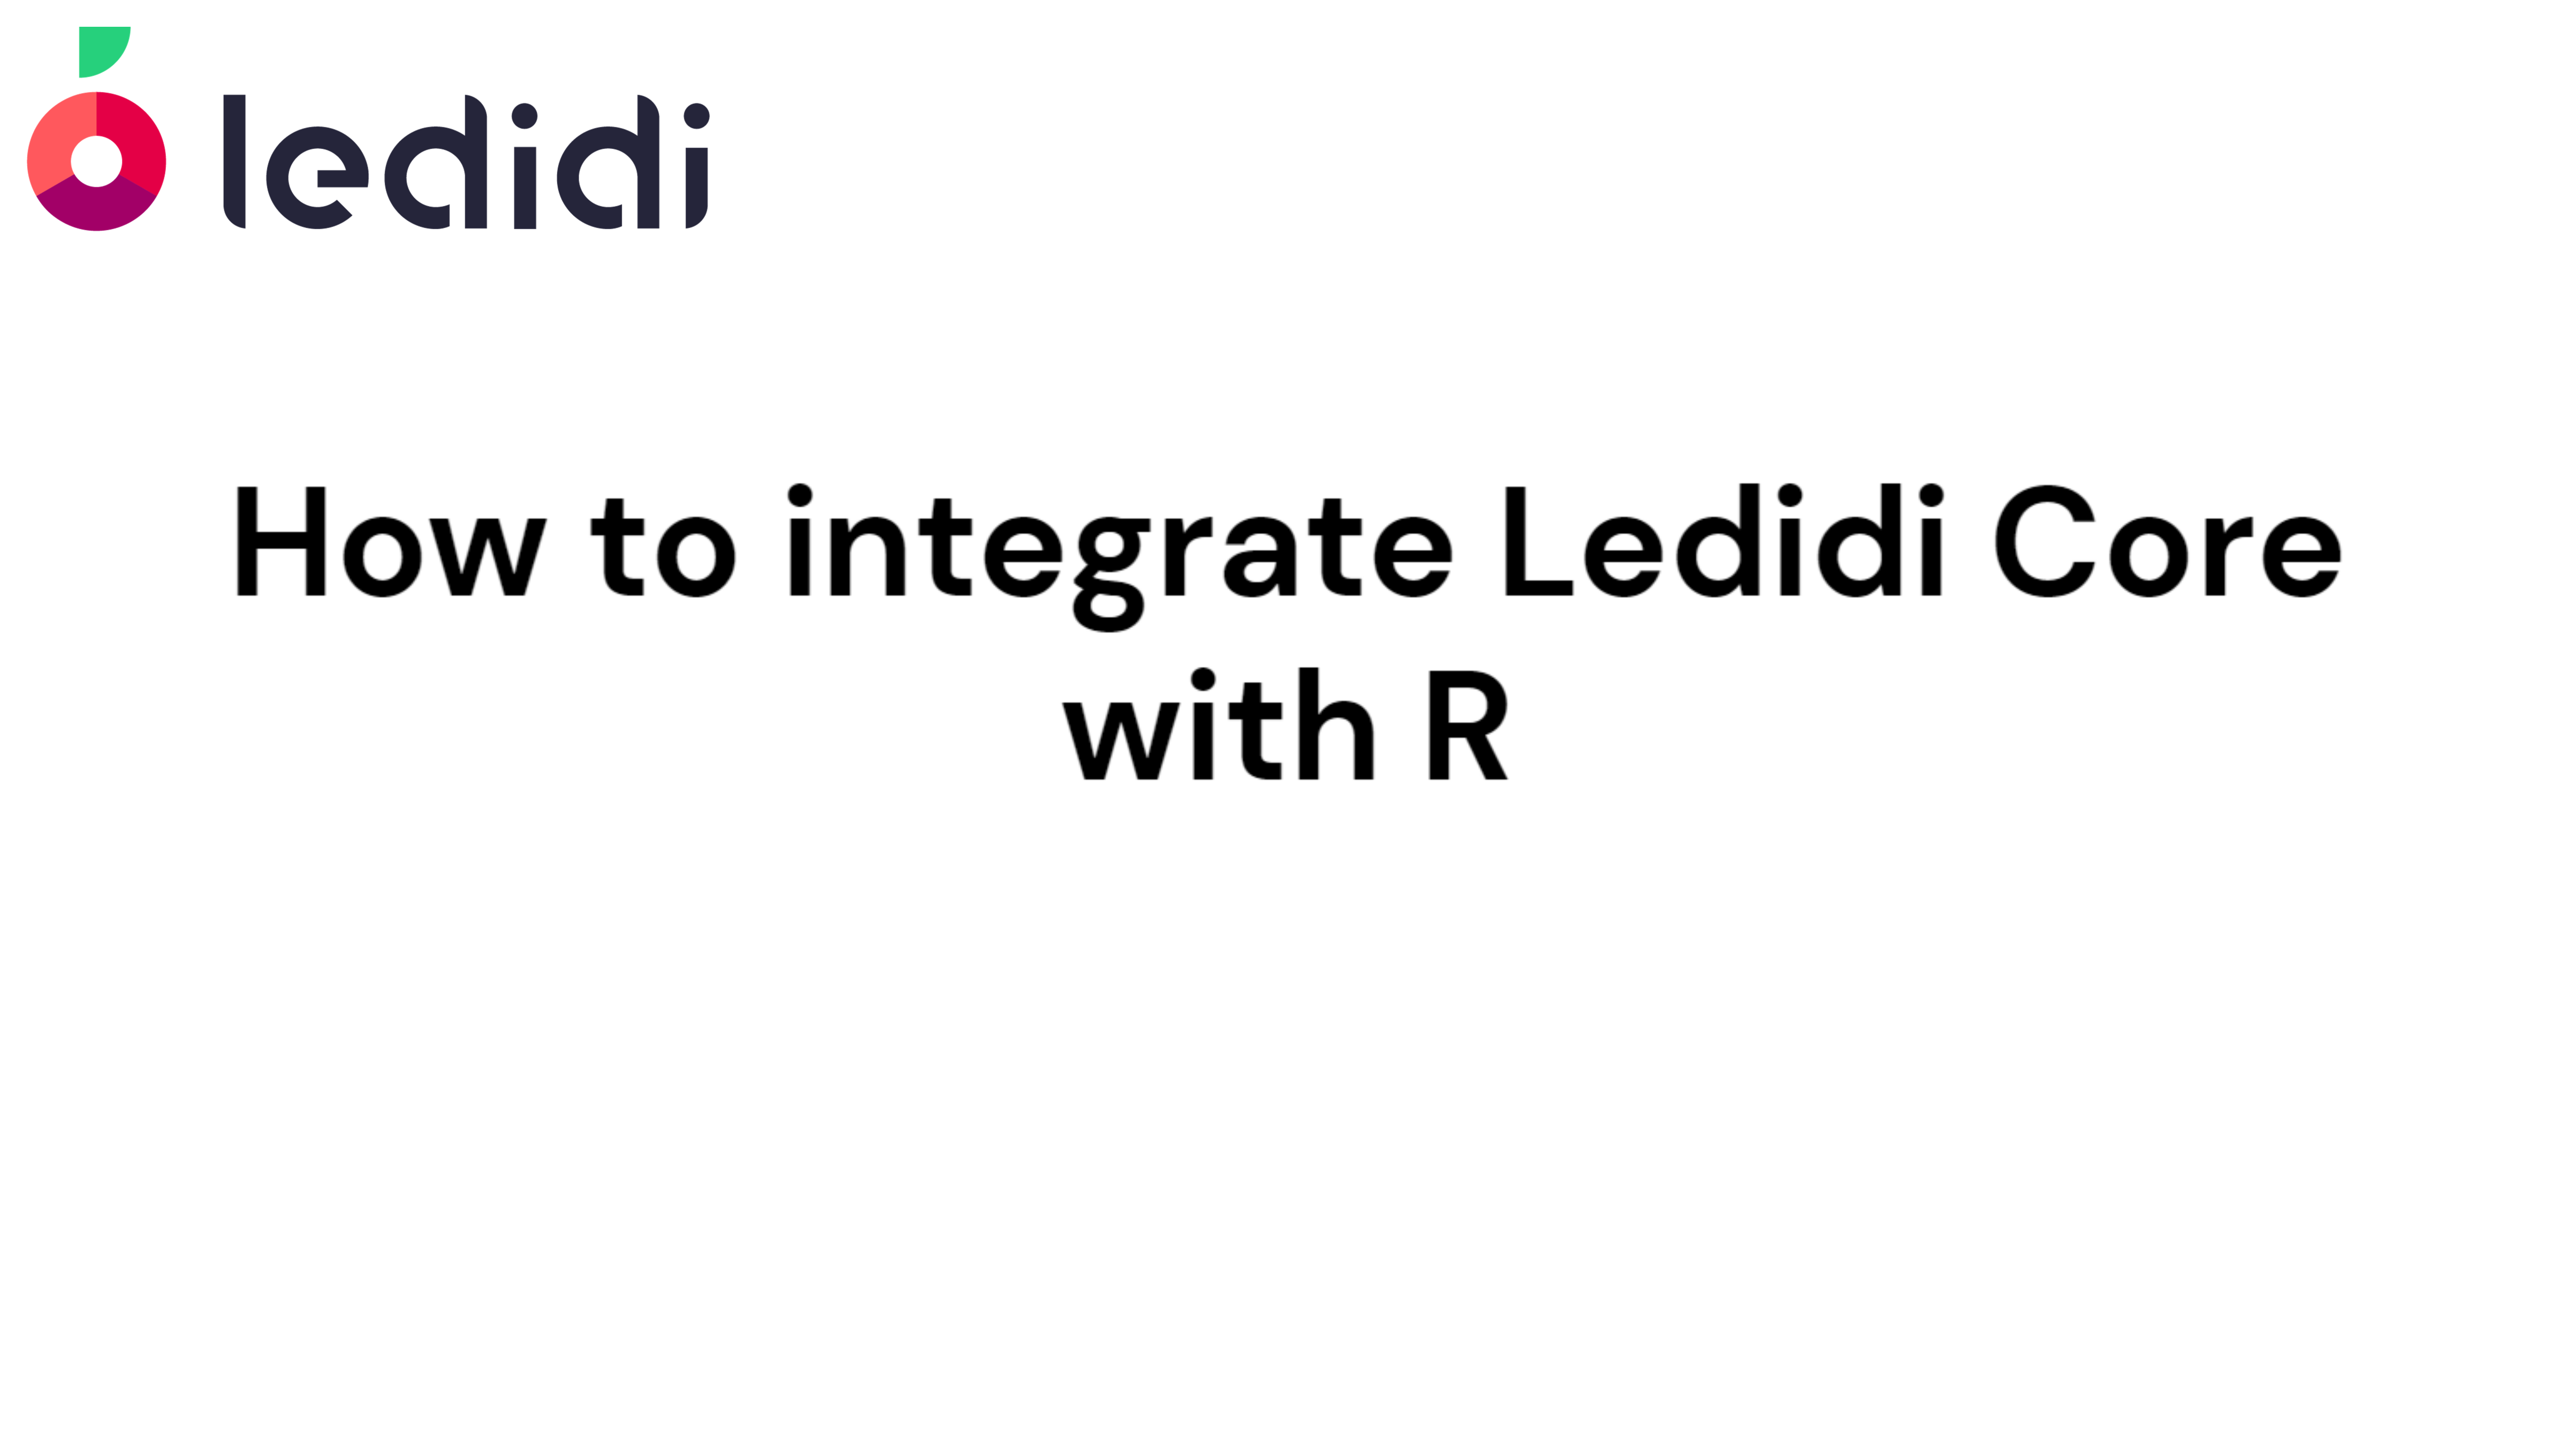 How to integrate Ledidi Core with R